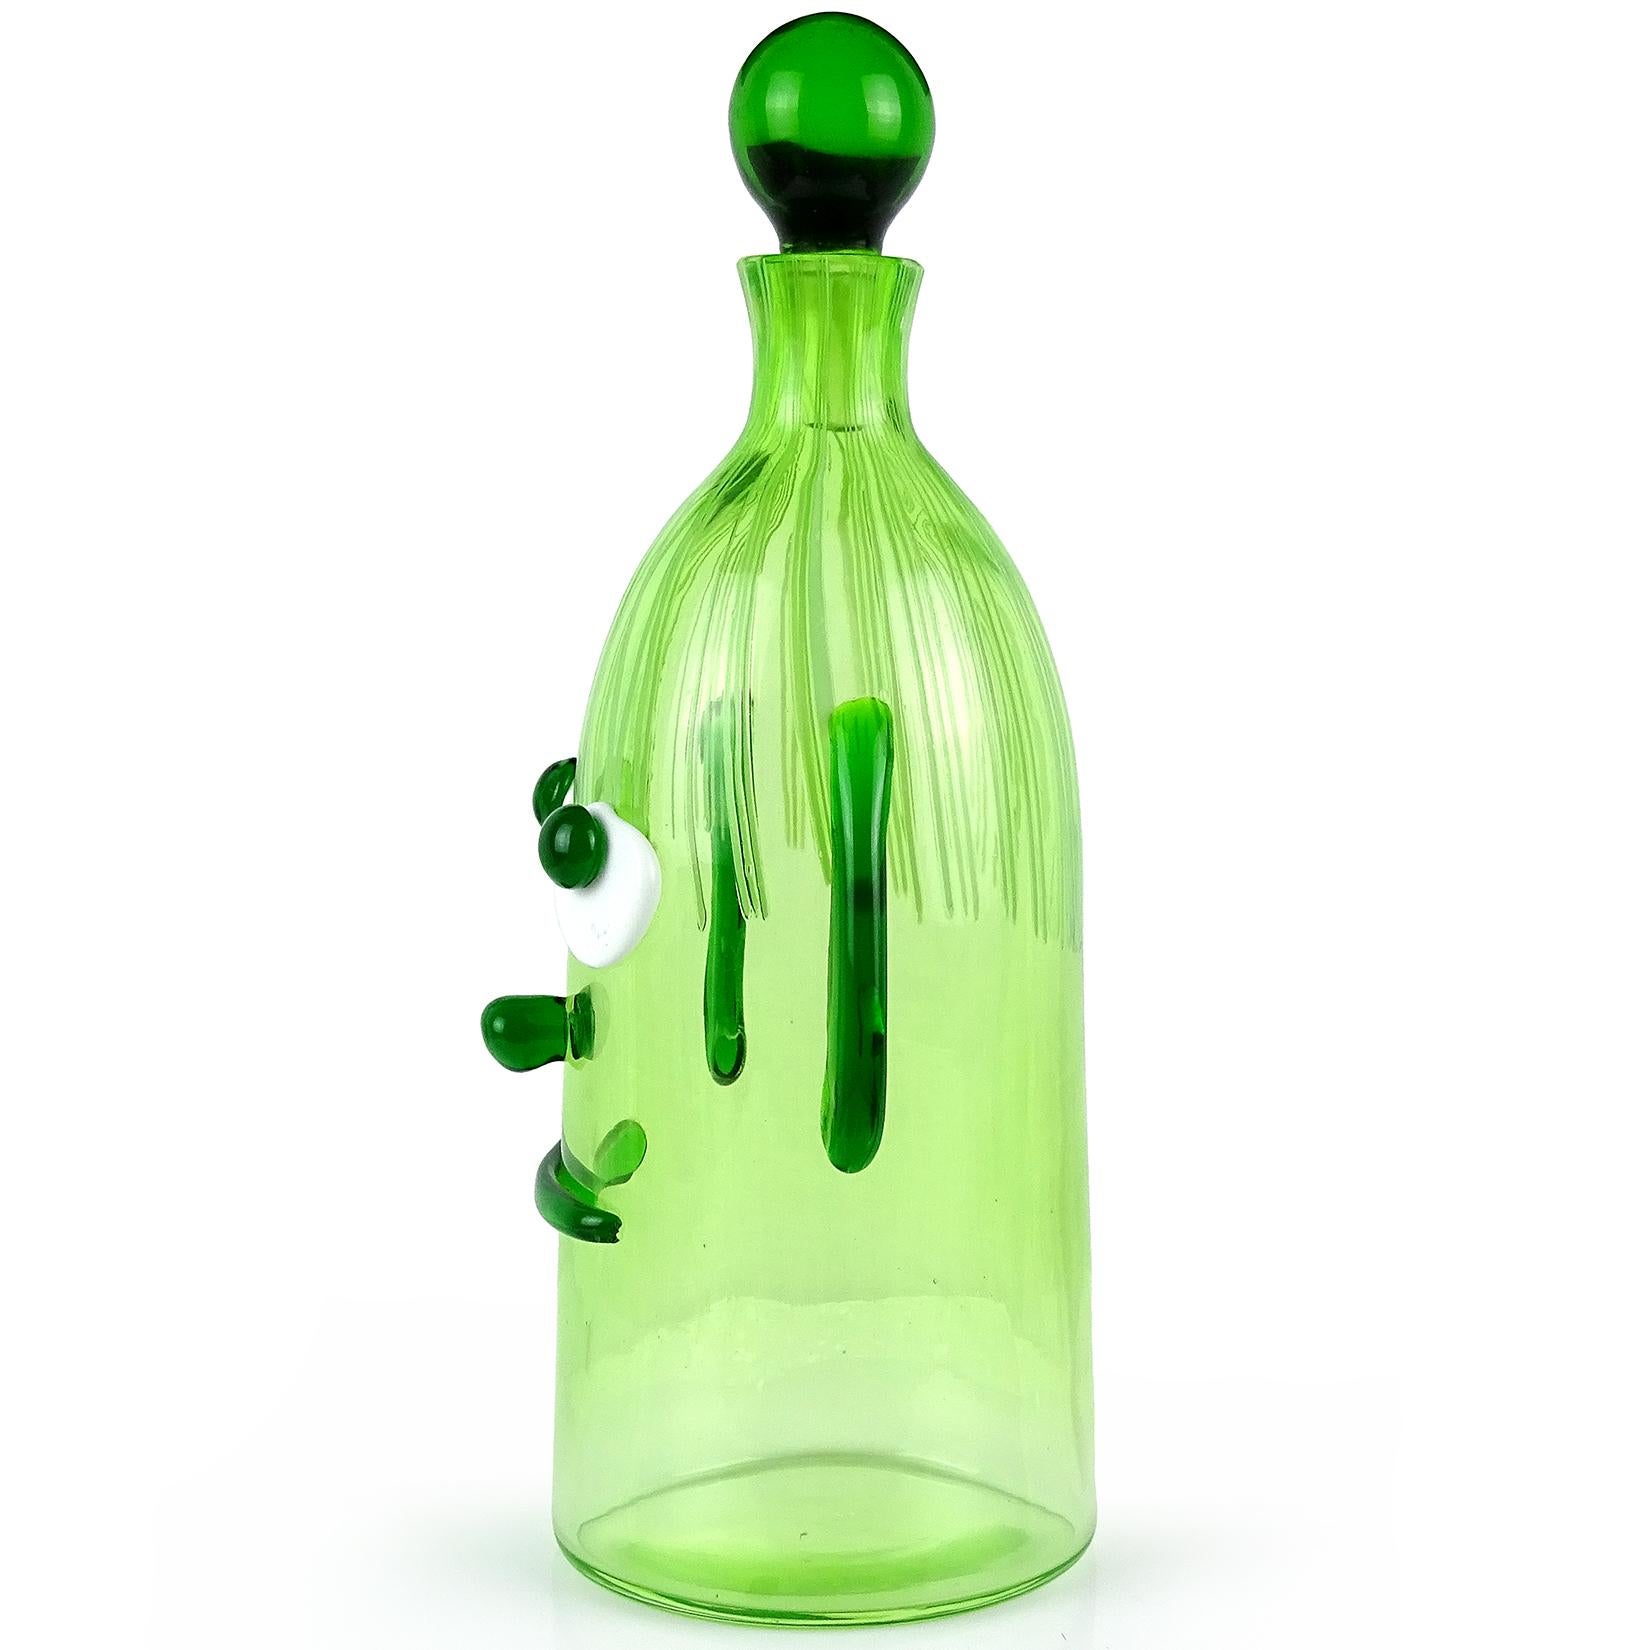 Cute and unusual Murano hand blown Italian art glass decanter, with green and white clown face. Documented to the Fratelli Toso Company. The piece has applied ears, wide eyes, a big smile and threads of pink glass for the hair. Measures: 11